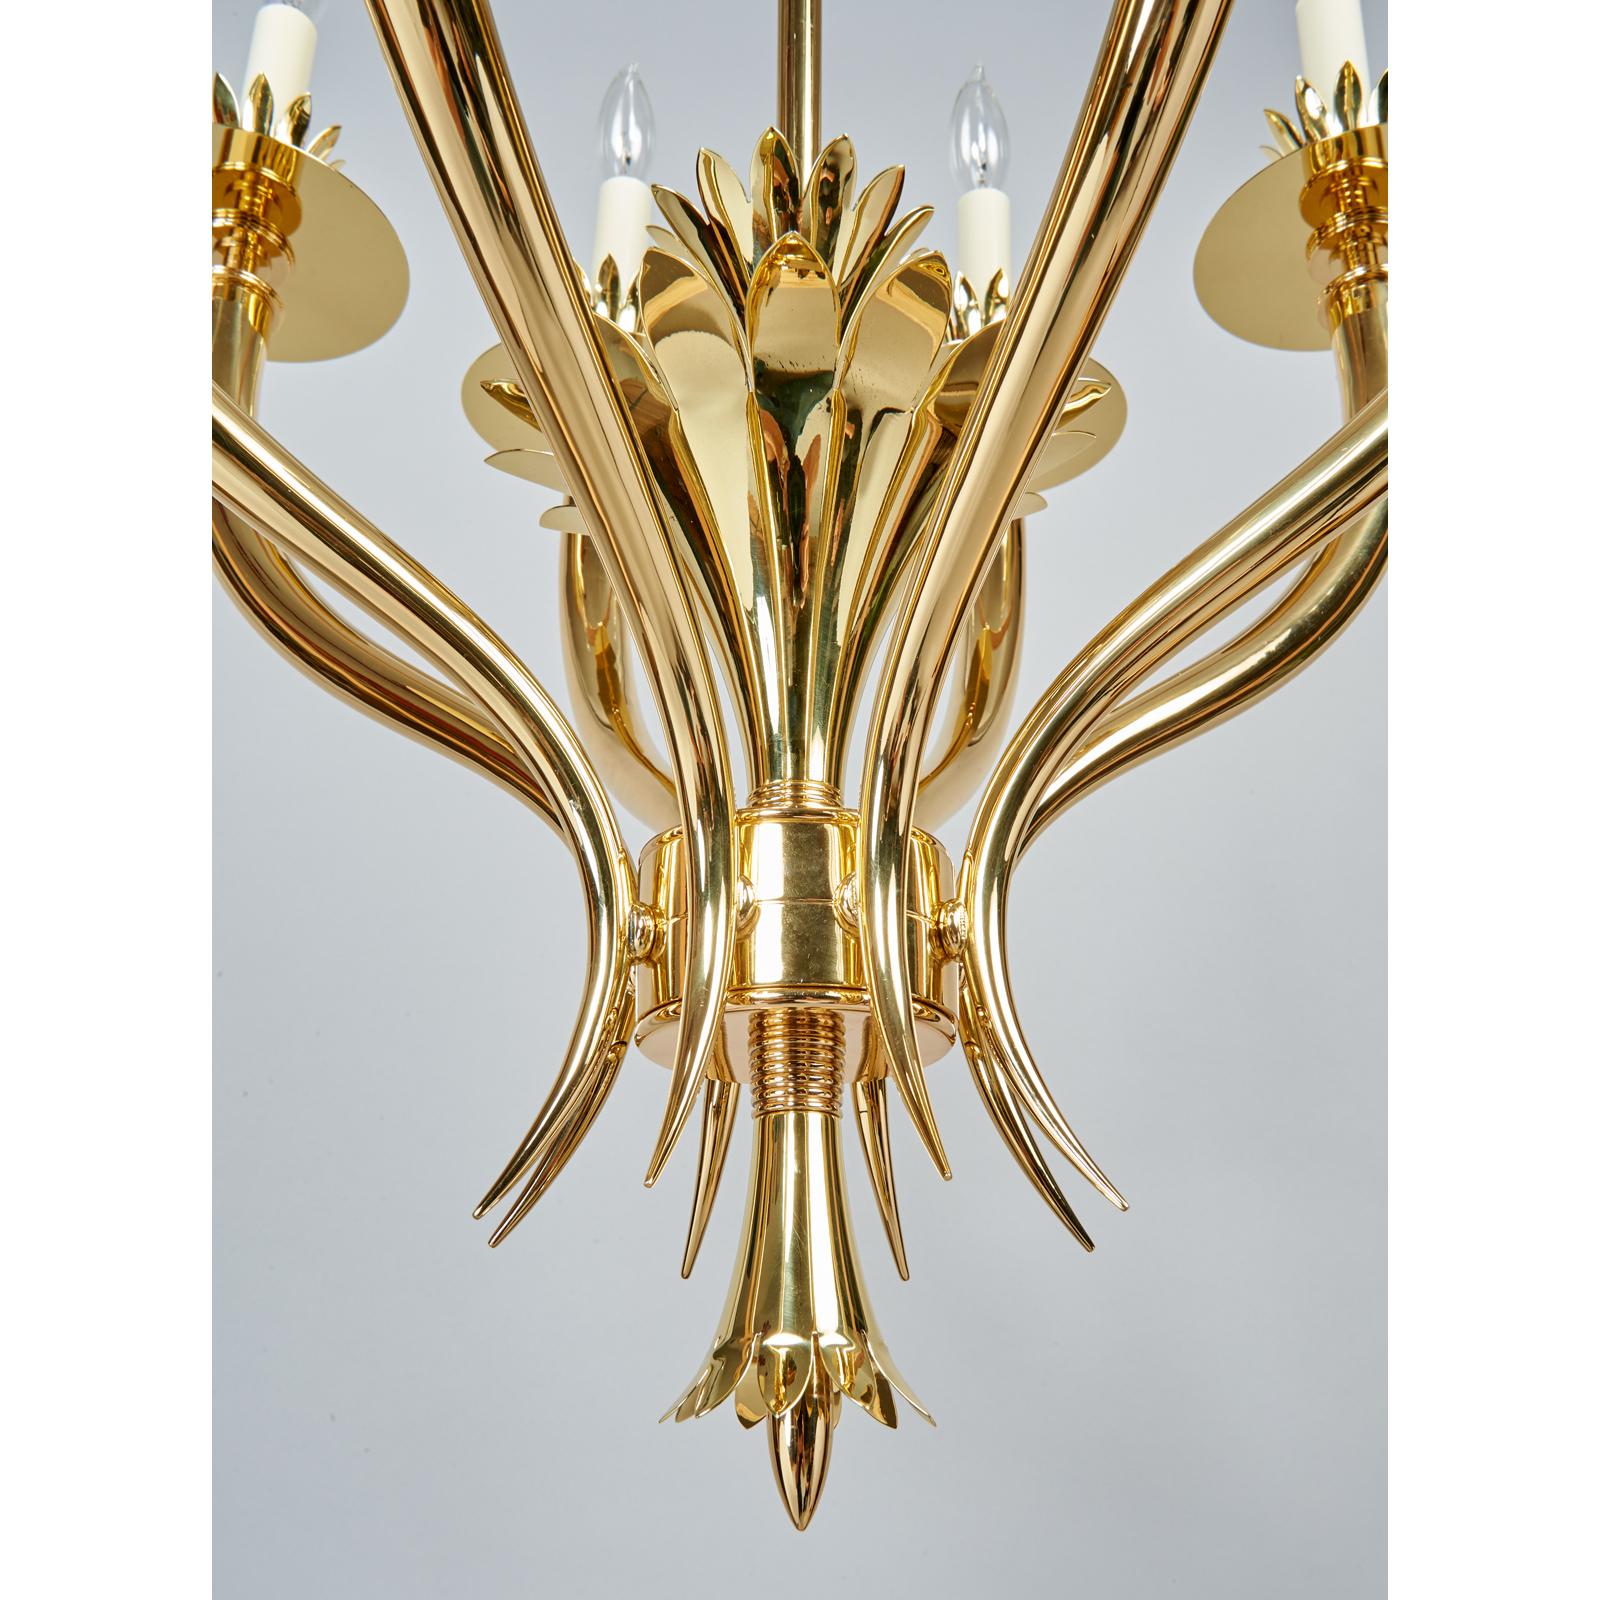 Gio Ponti: Important Geometric 8-Arm Chandelier in Polished Brass, Italy 1930s For Sale 3